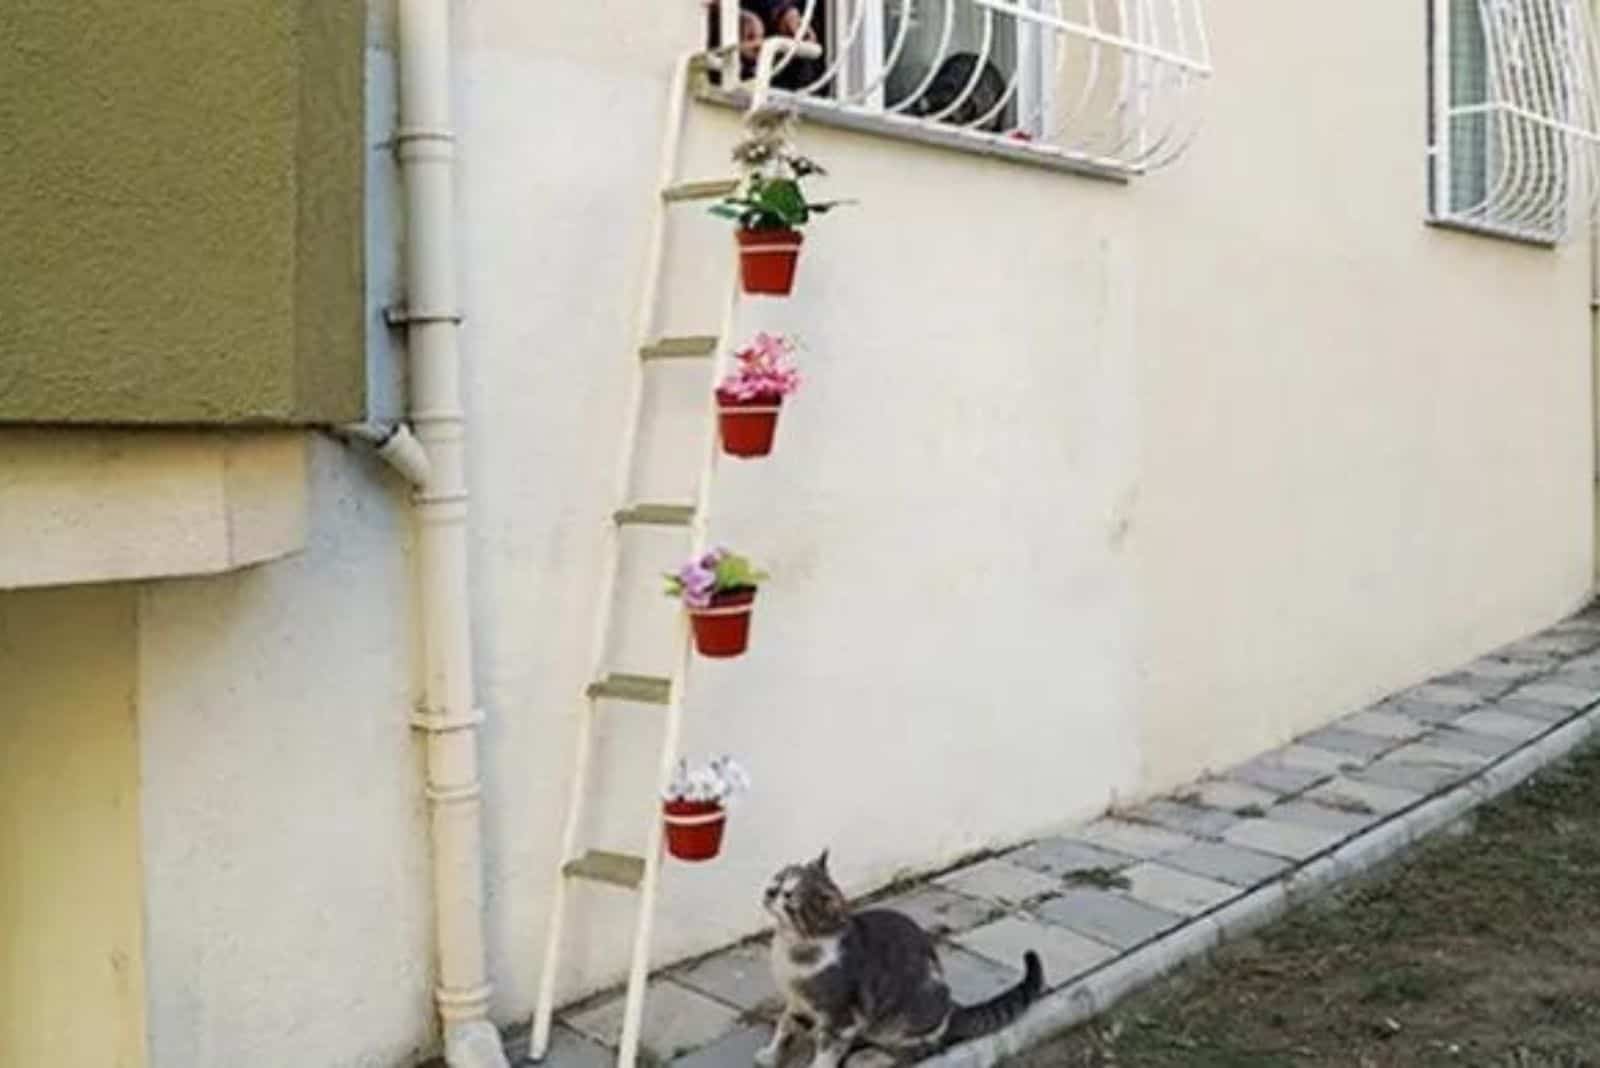 Photo of the ladder and a stray cat